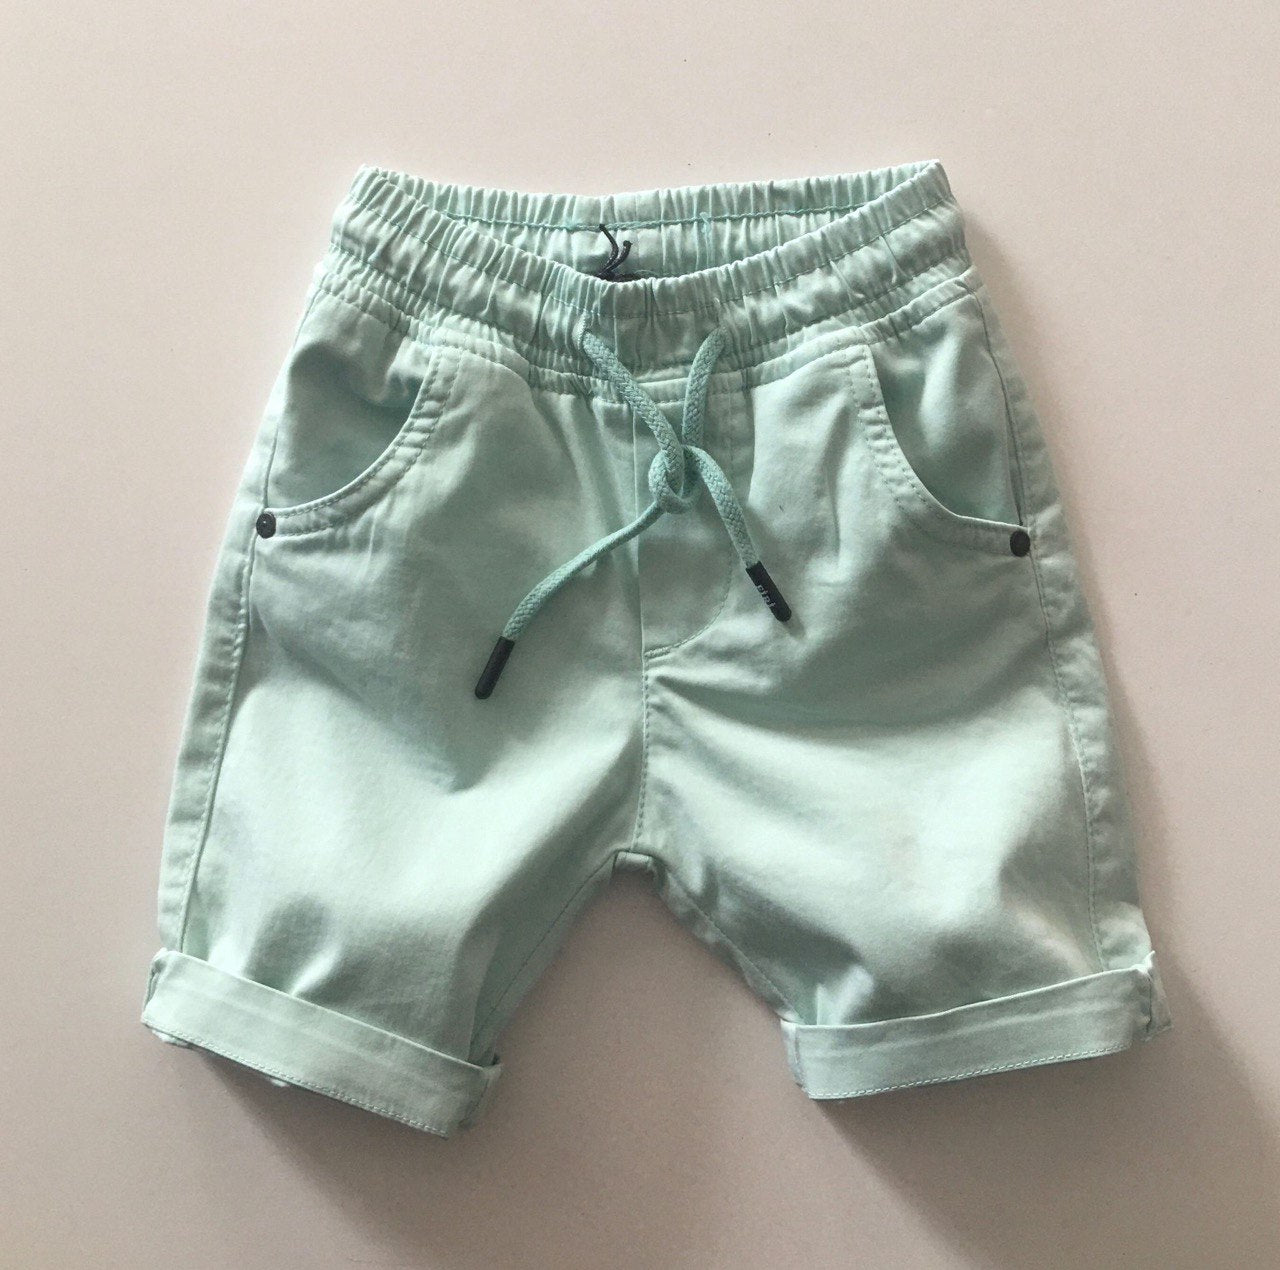 Turquoise Short 1 to 5